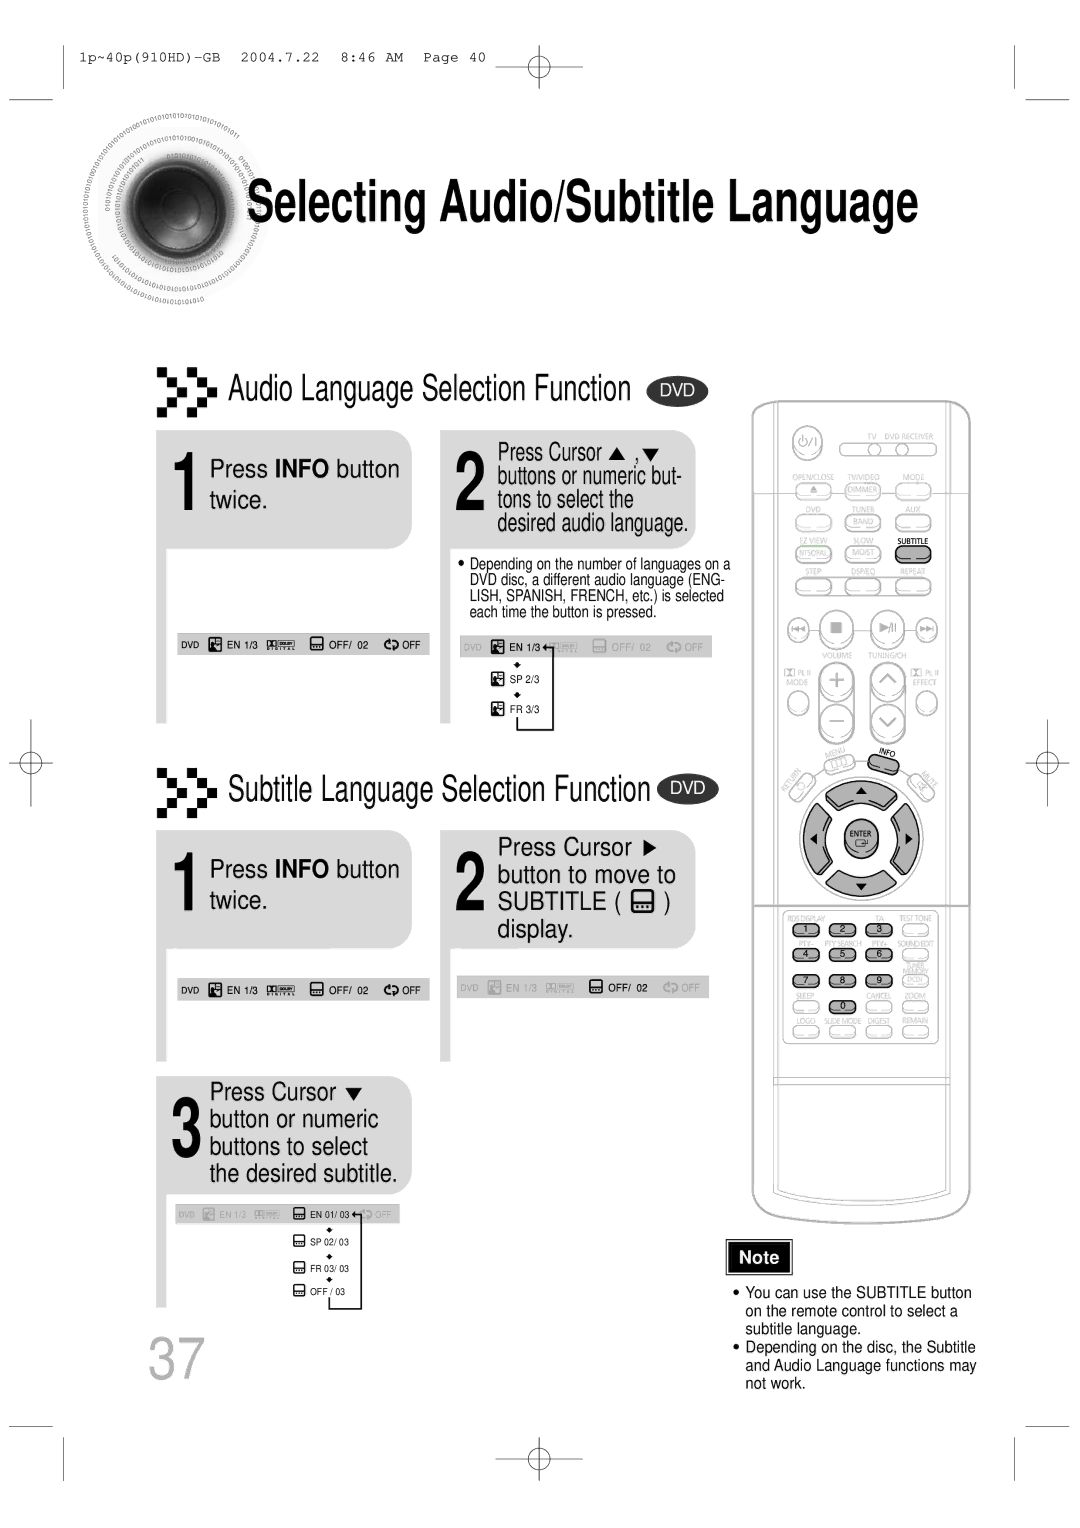 Samsung HT-910HDRH/EDC manual 1Press Info button twice, Desired audio language, Buttons to select the desired subtitle 